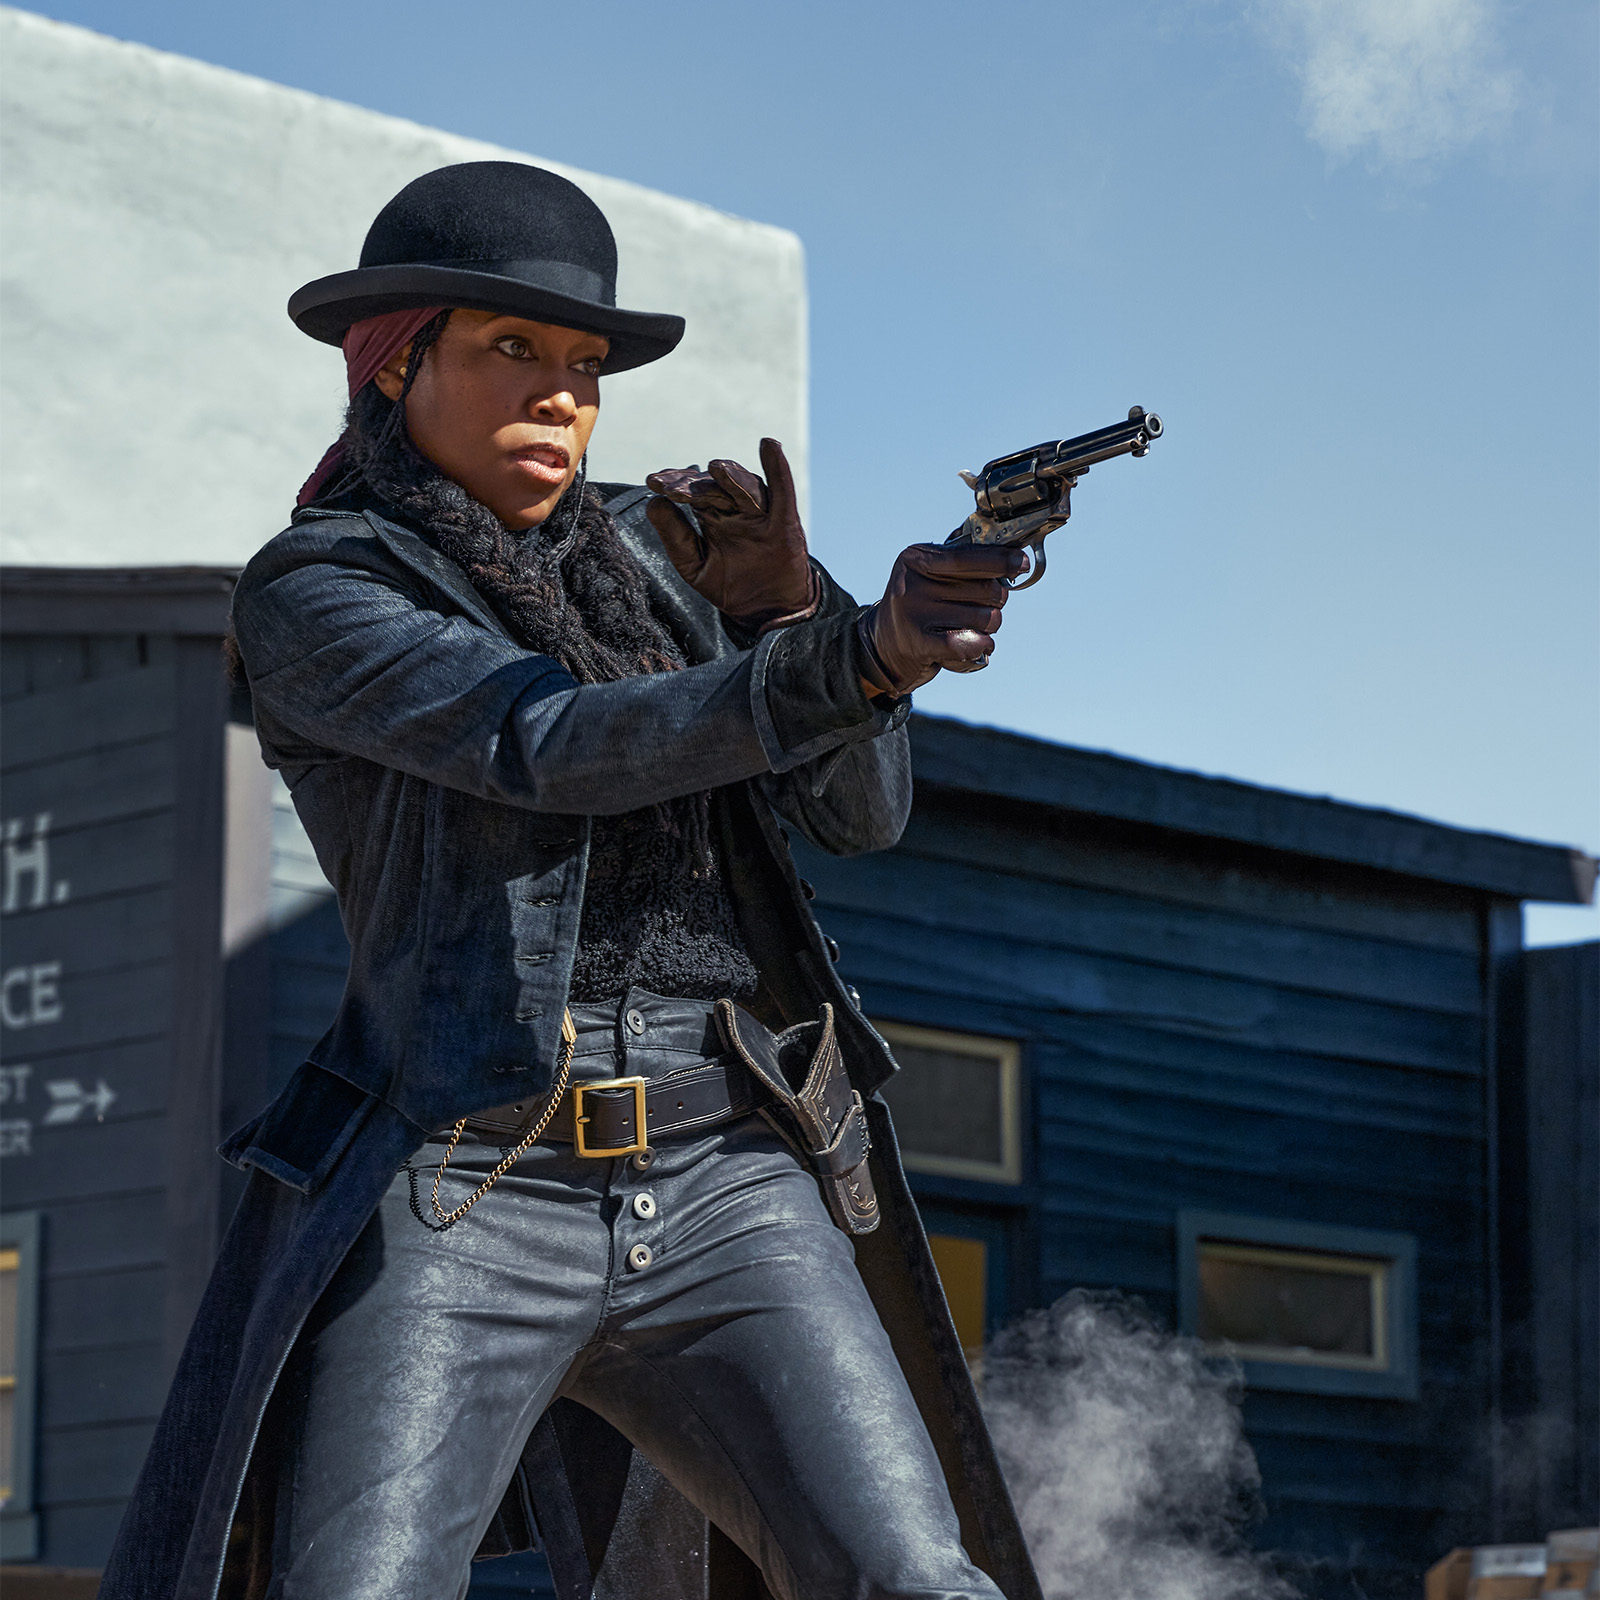 Gunslinger Trudy Smith (Regina King) in The Harder They Fall. Image © Netflix